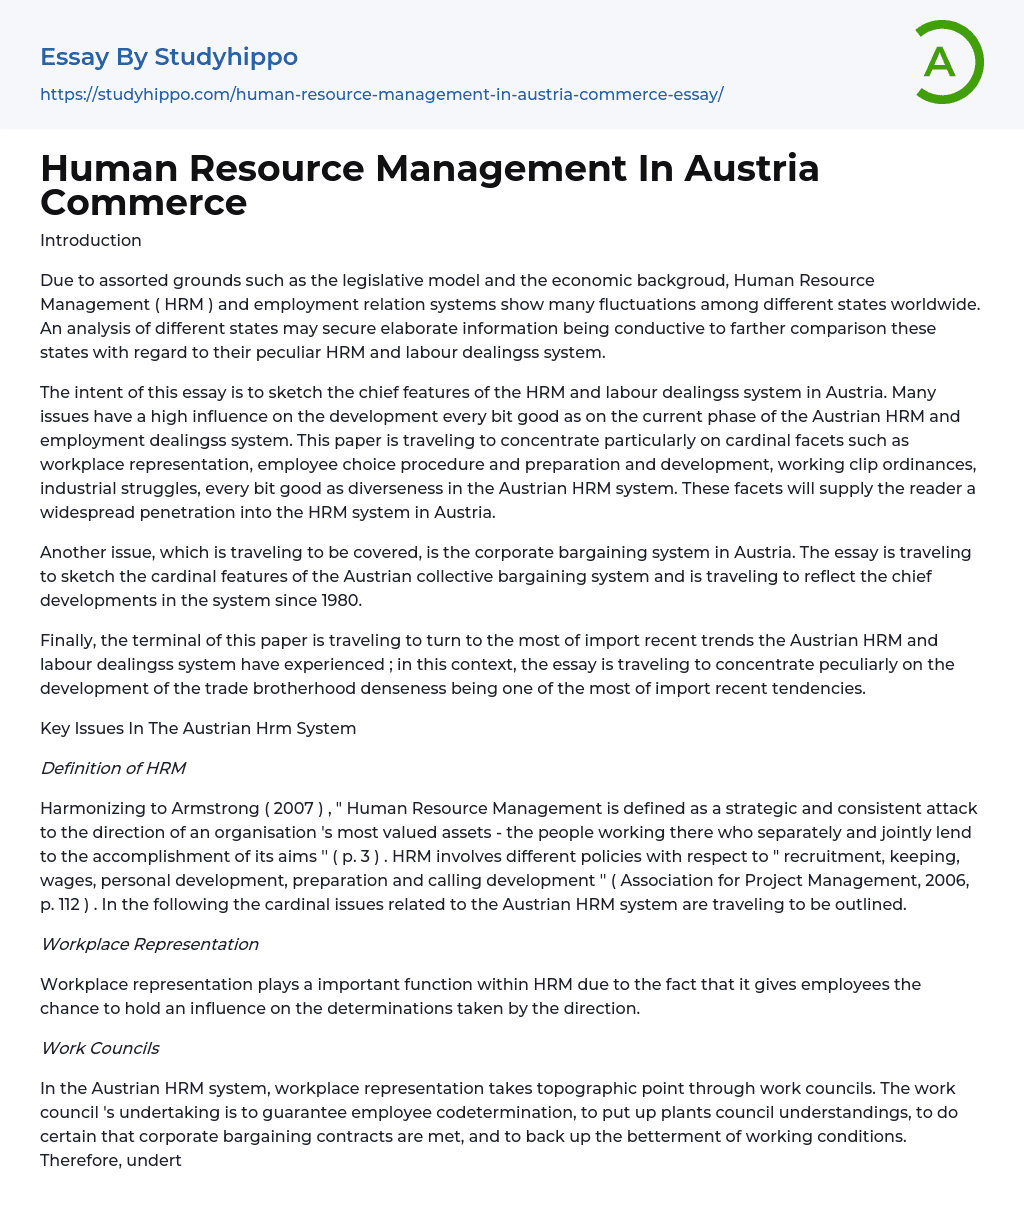 Human Resource Management In Austria Commerce Essay Example